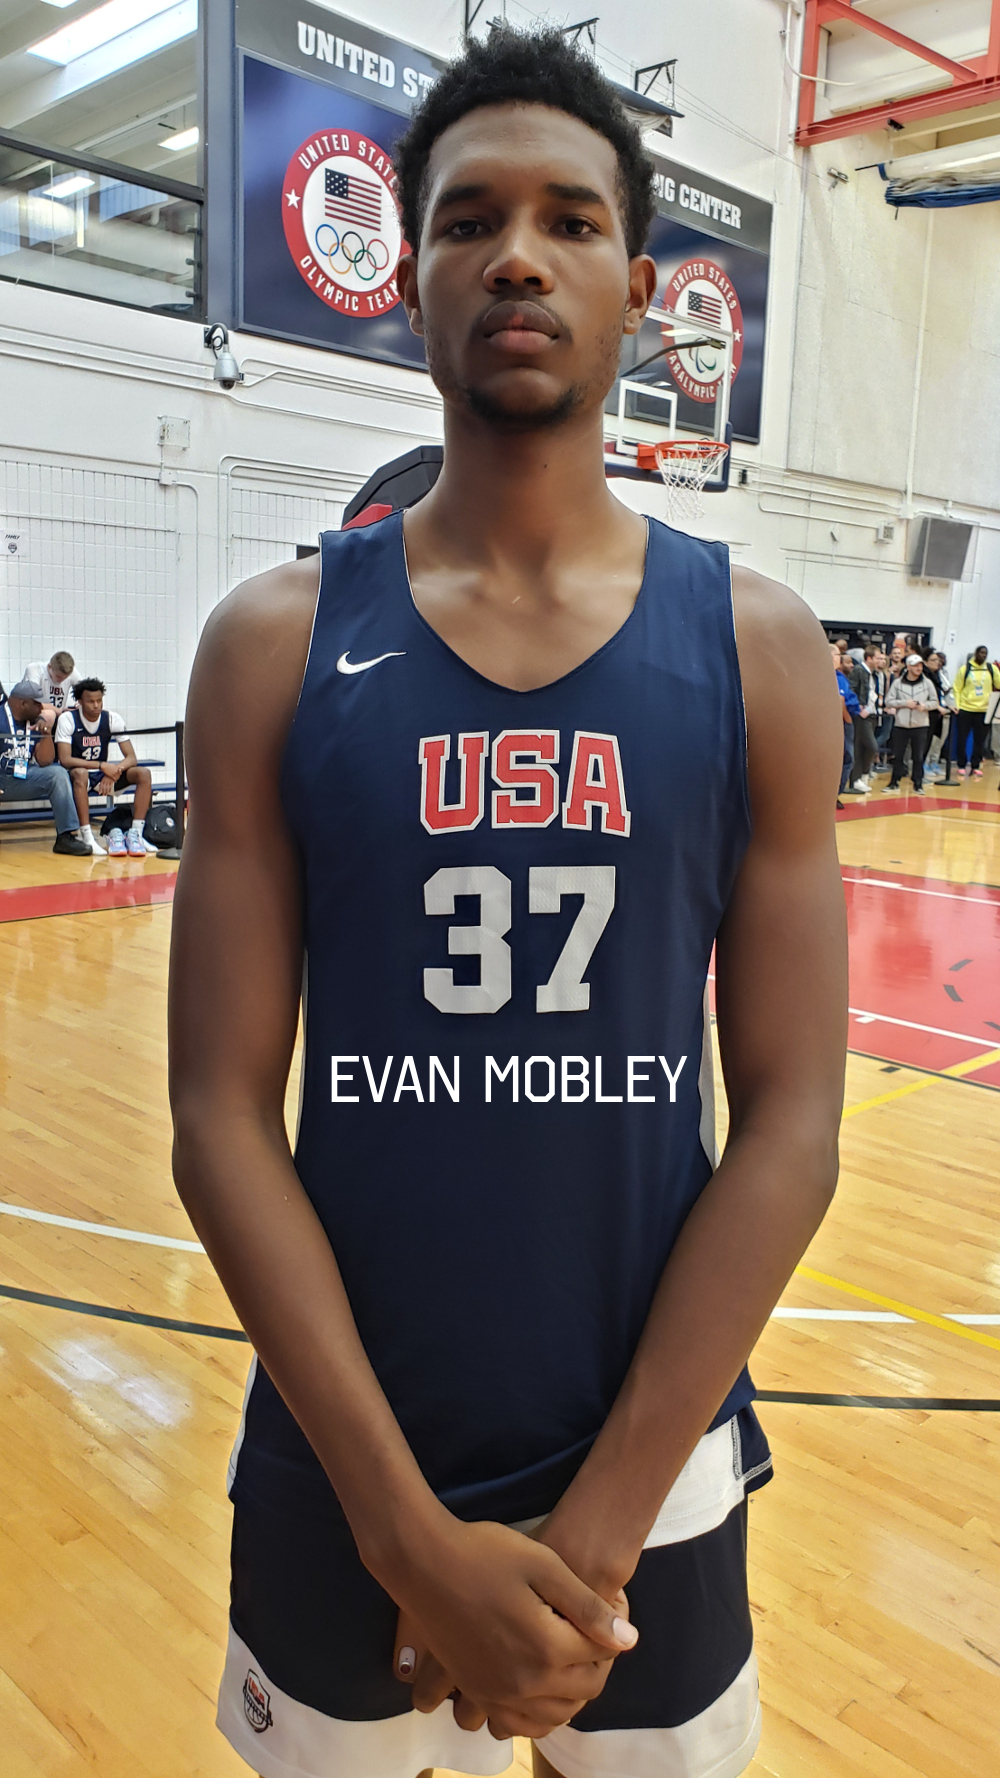 One on one with Evan Mobley, the nation's top big man